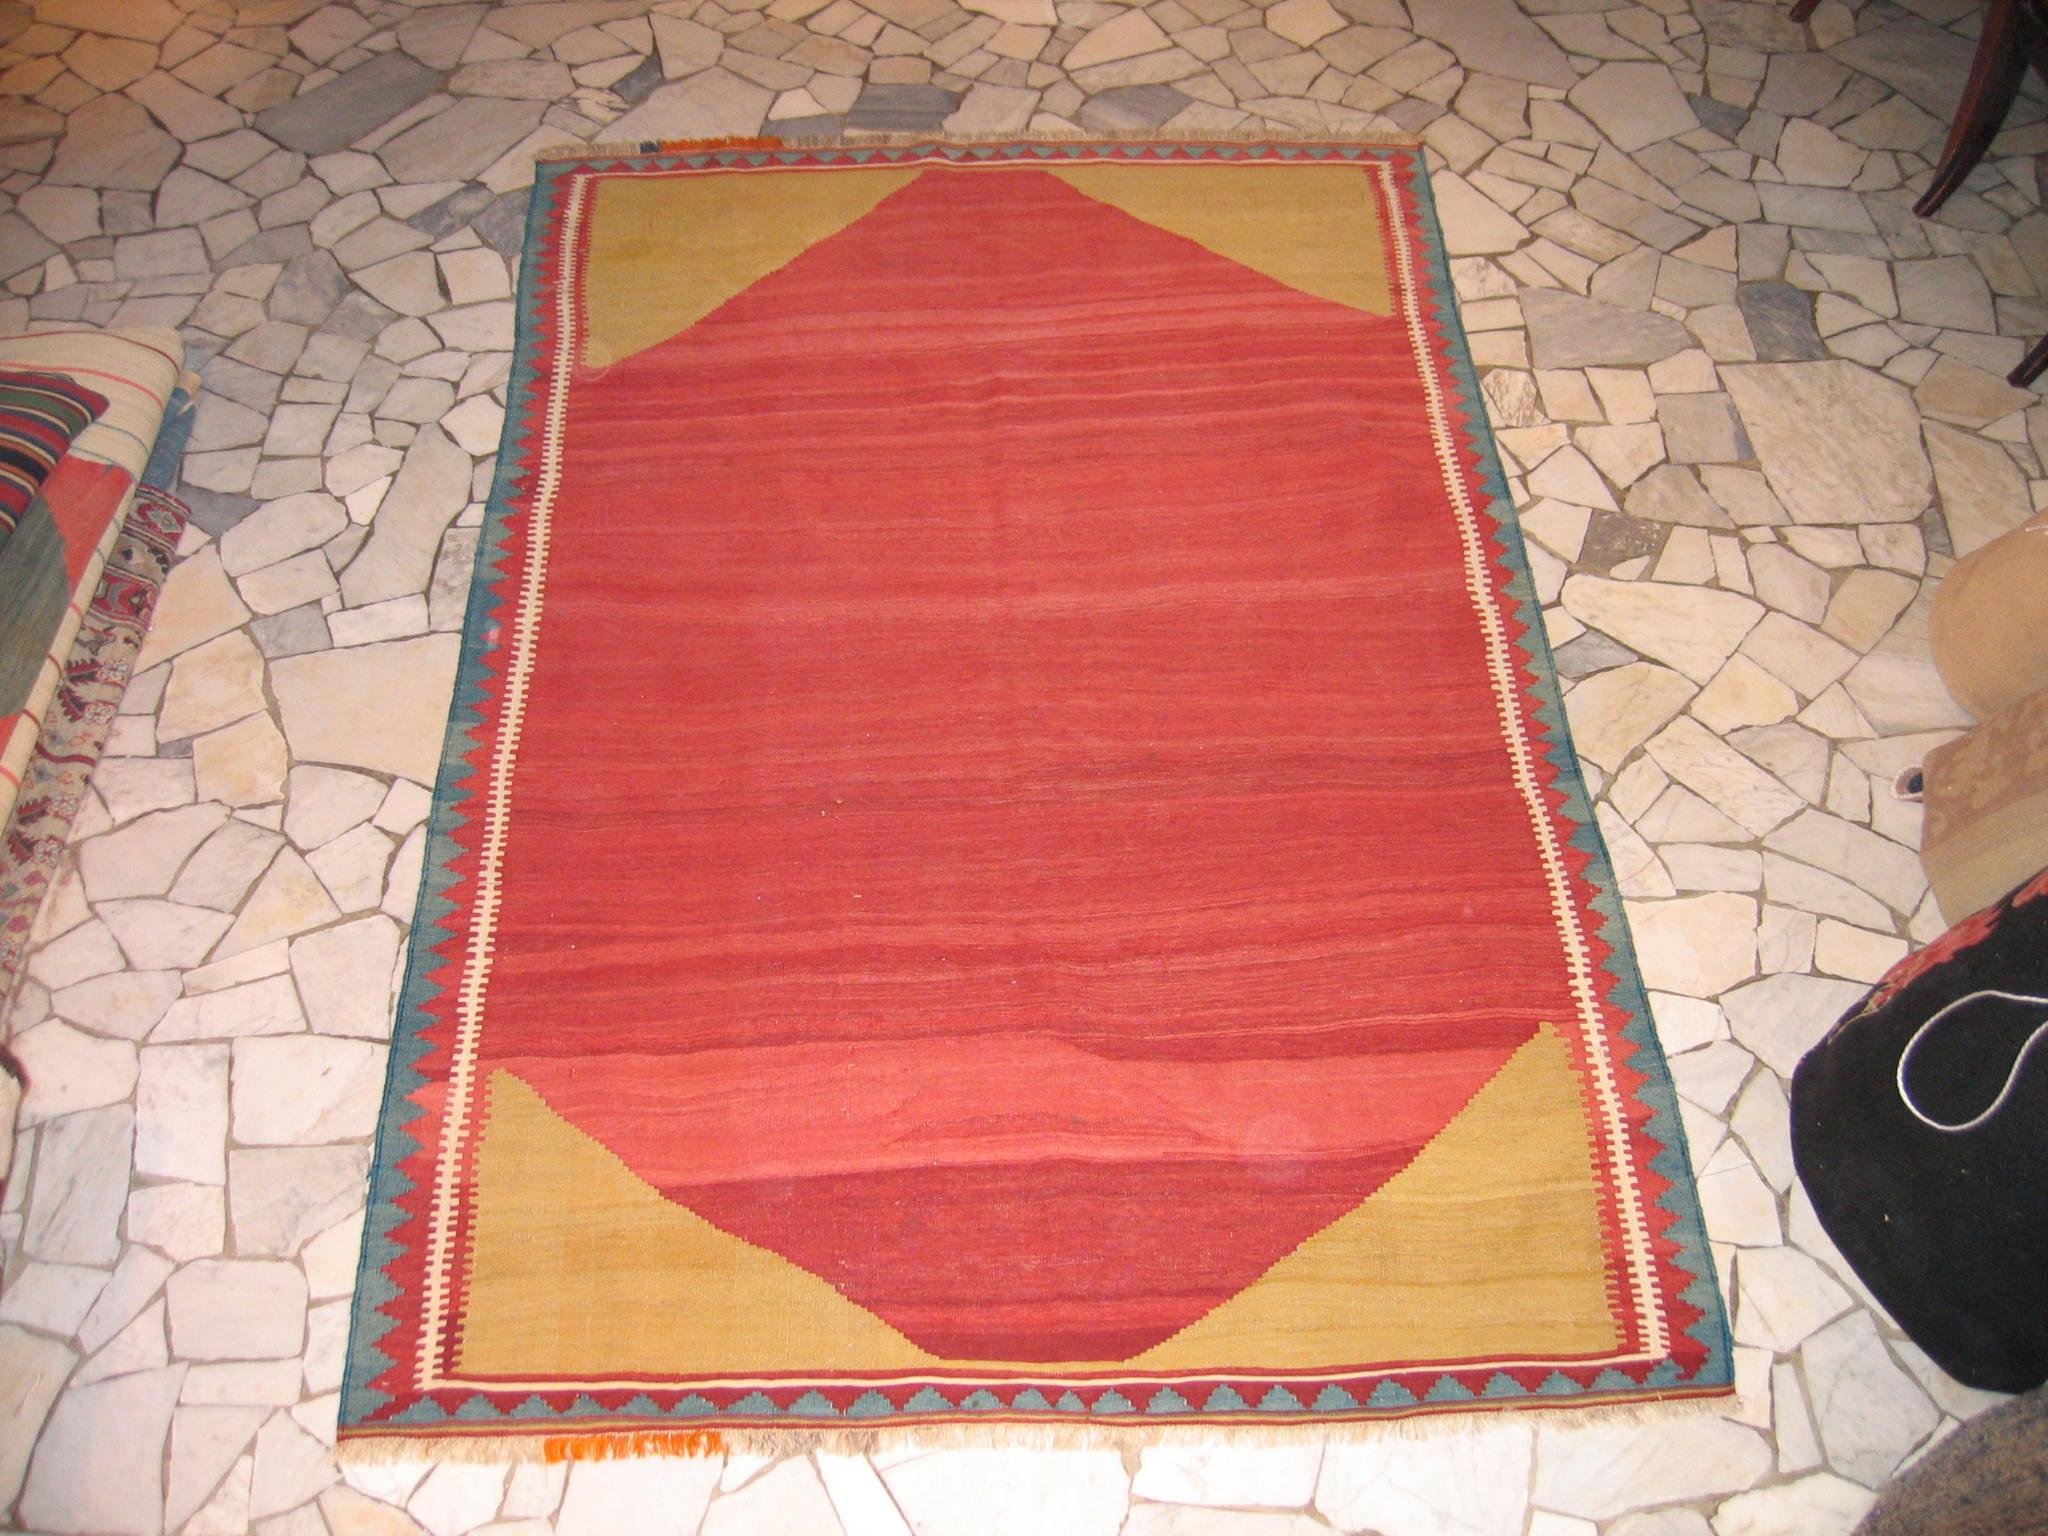 A highly graphic tribal Kilim decorated by a large hexagonal open field cartouche in various shades of red laid over a pistachio green background, of which we see only the corner elements. Flat weaves of this type are highly coveted because its